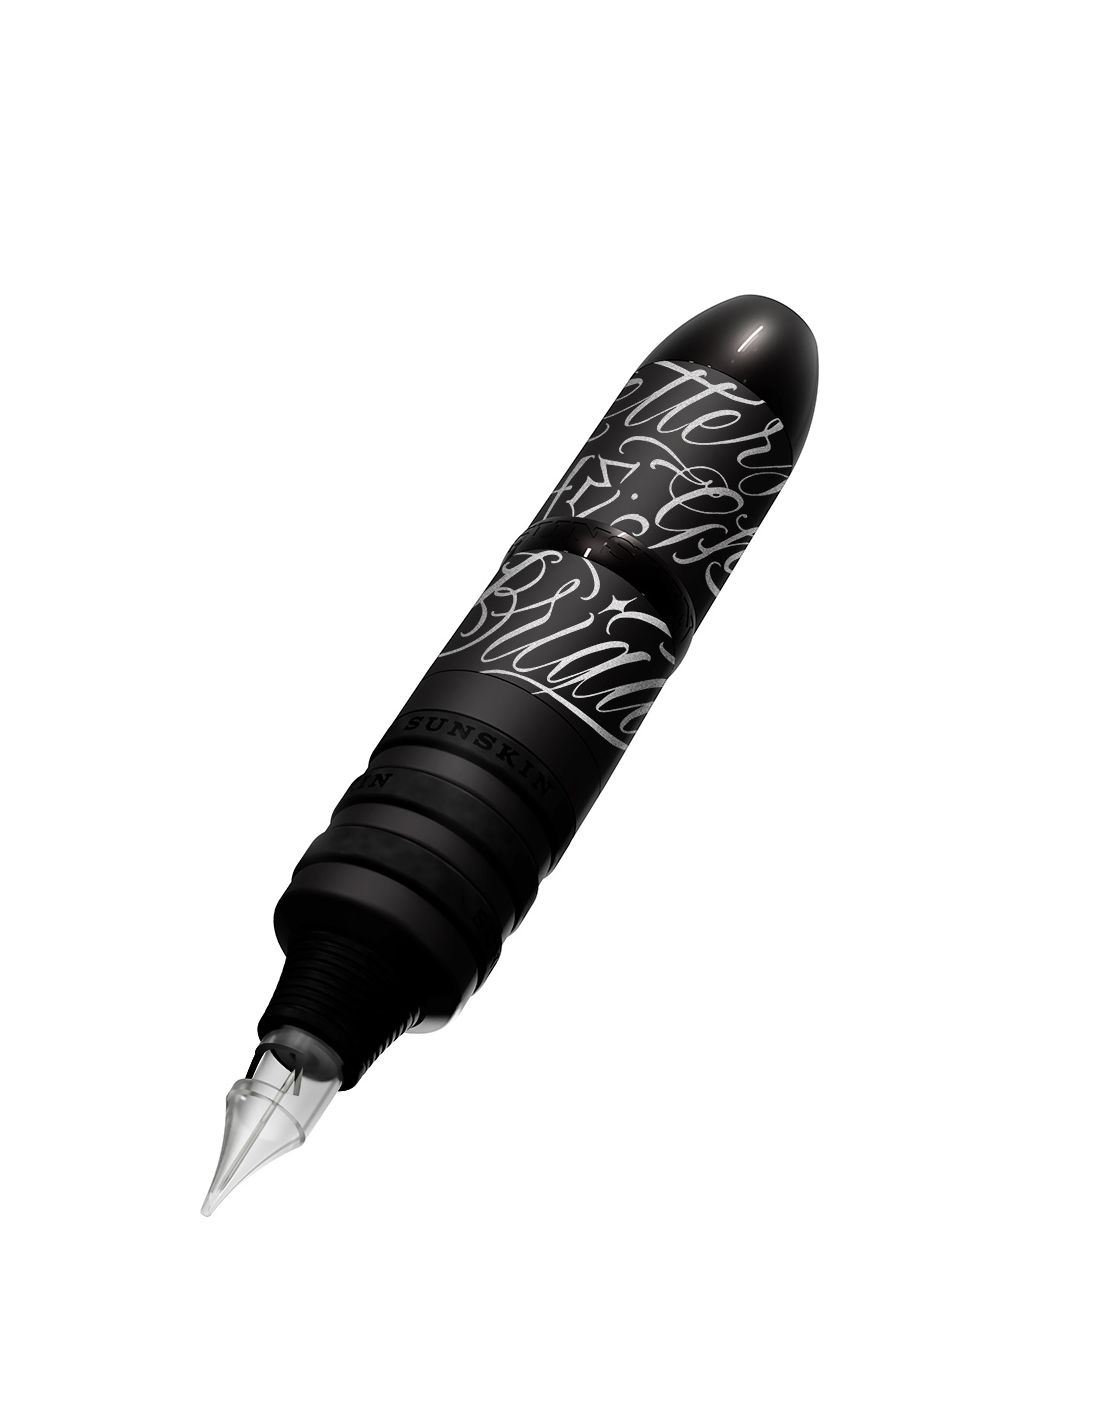 Tattoo inspired fountain pens from BENU (review) - YouTube